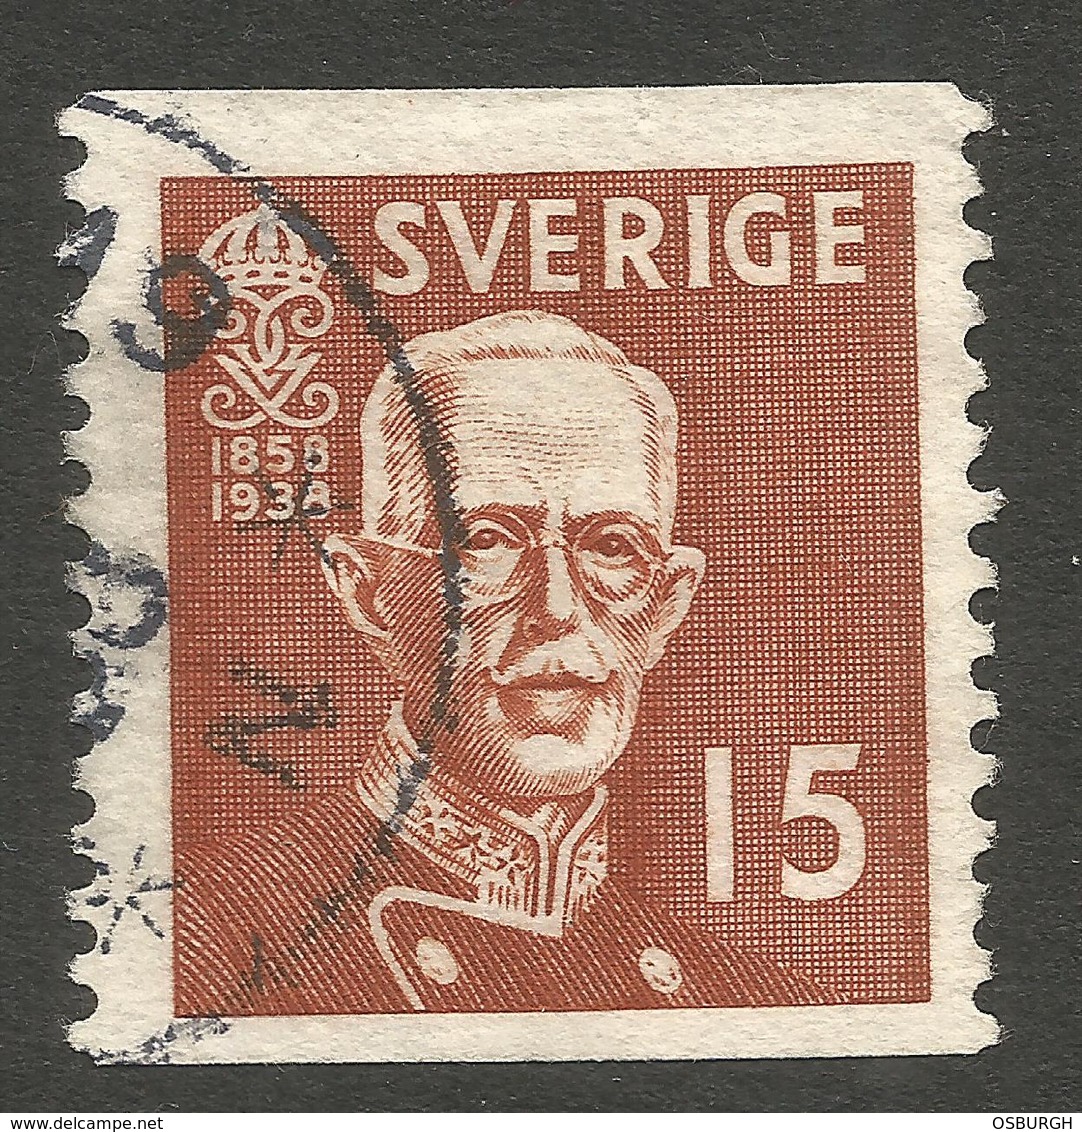 SWEDEN. 15o BROWN USED - Used Stamps